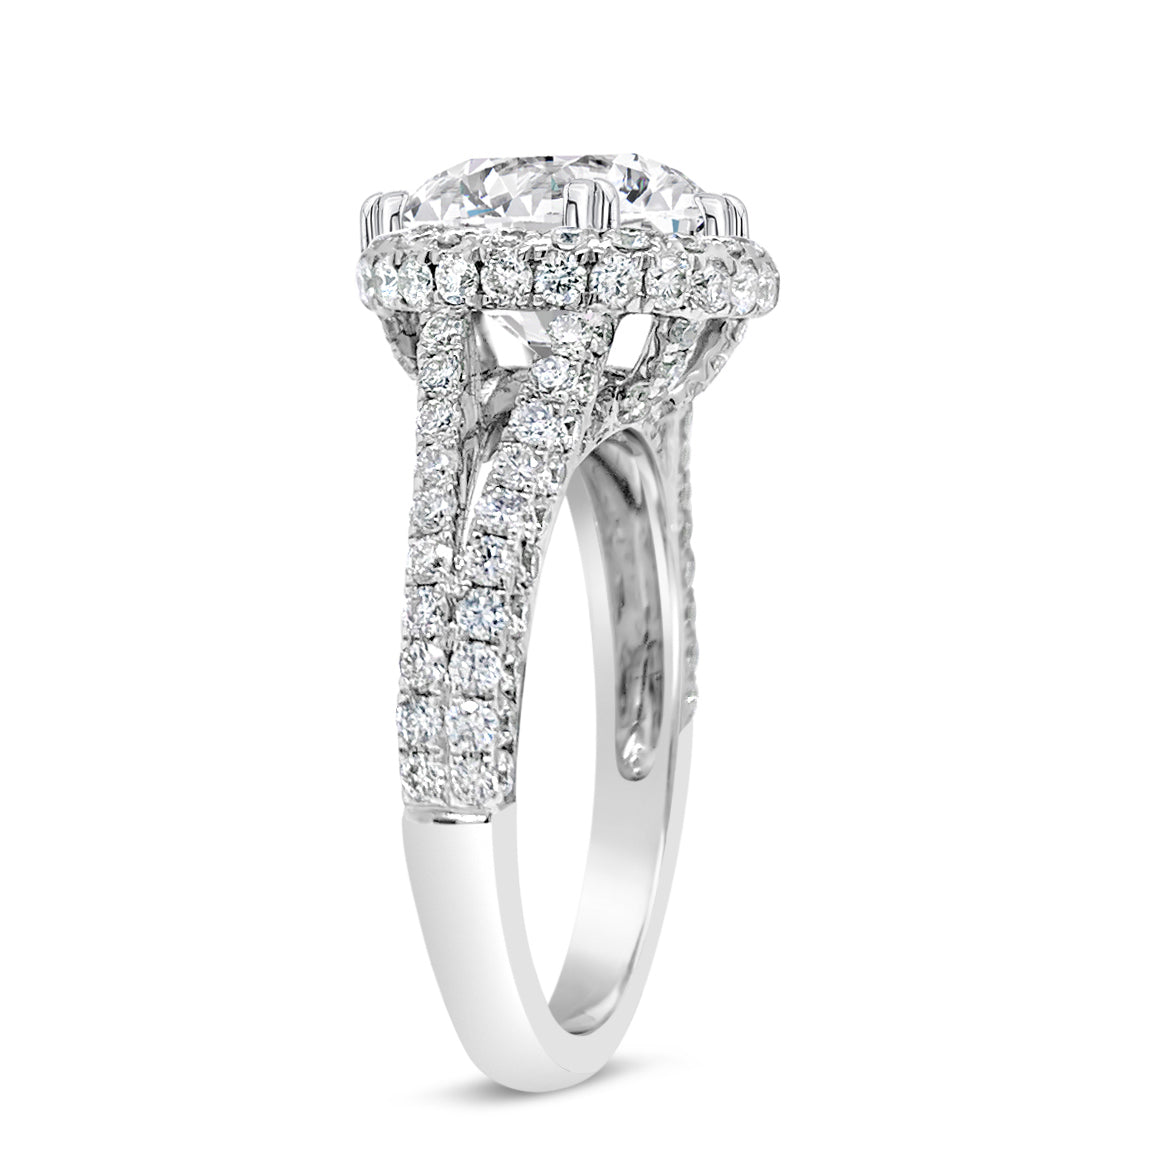 Double-Edge Halo Diamond Engagement Ring  -18K Weighting 4.97GR  - 150 round diamonds totaling 1.45 carats